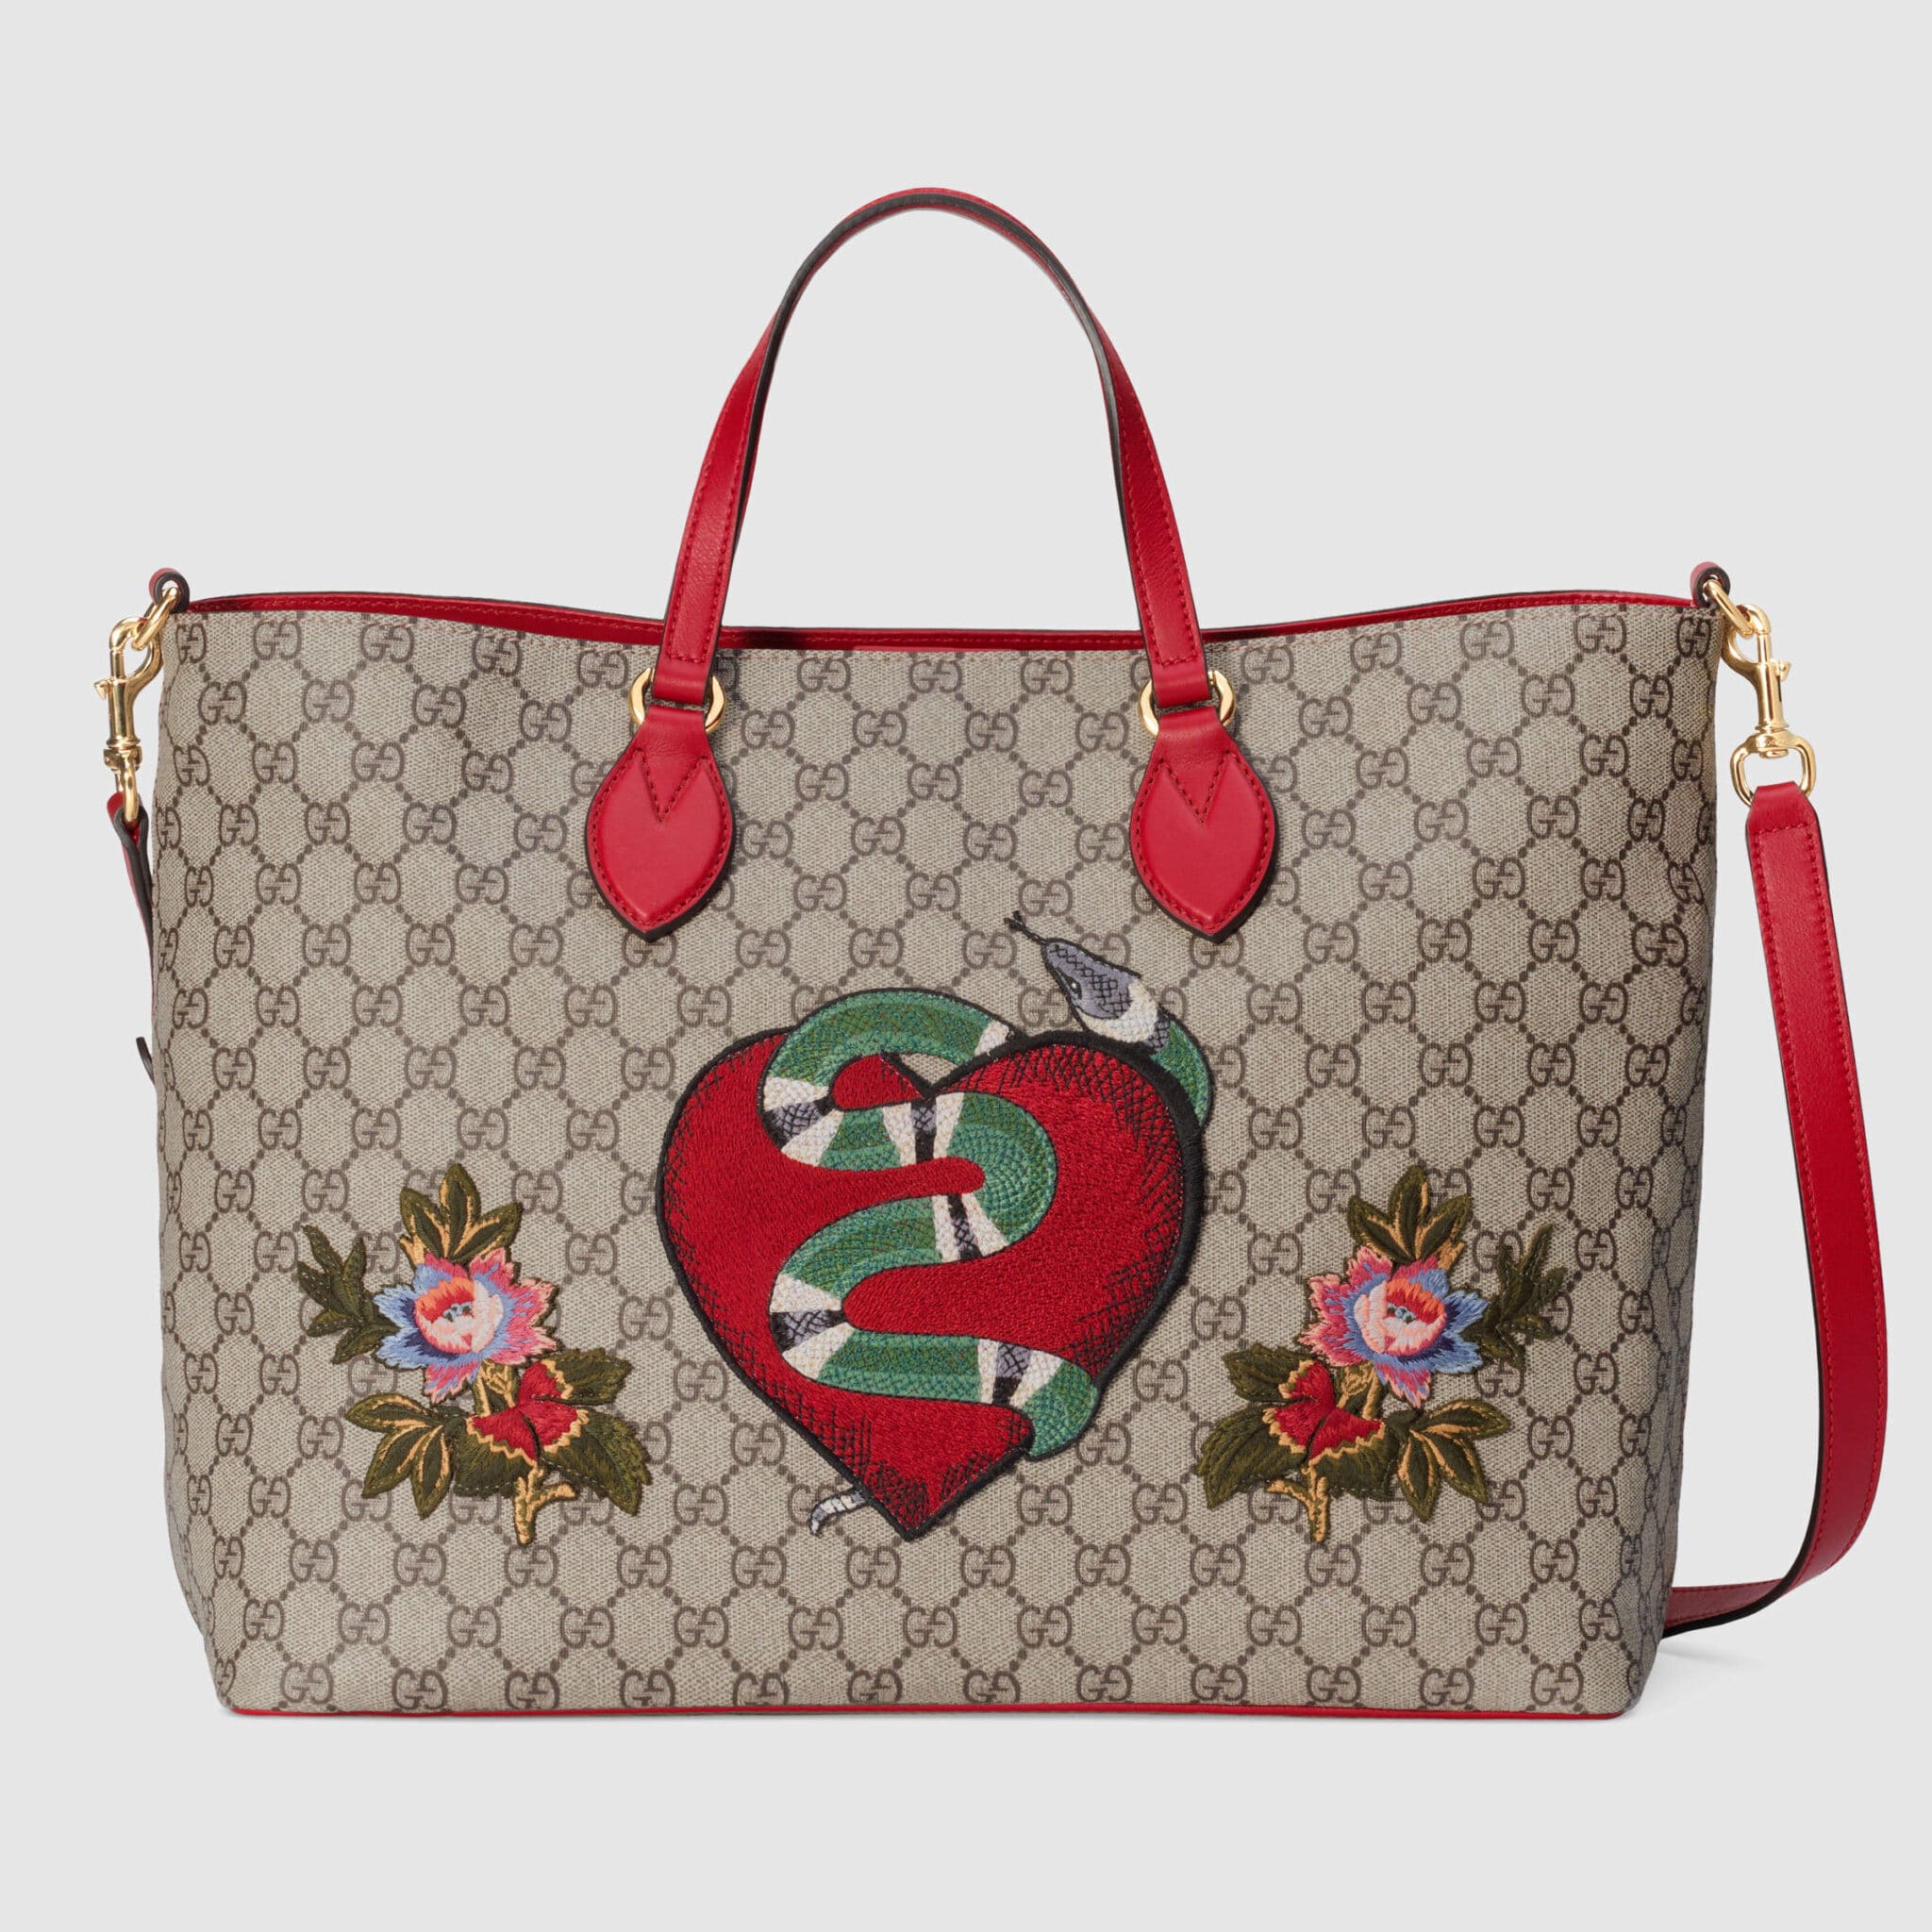 Gucci Gift Guide 2016 | Spotted Fashion